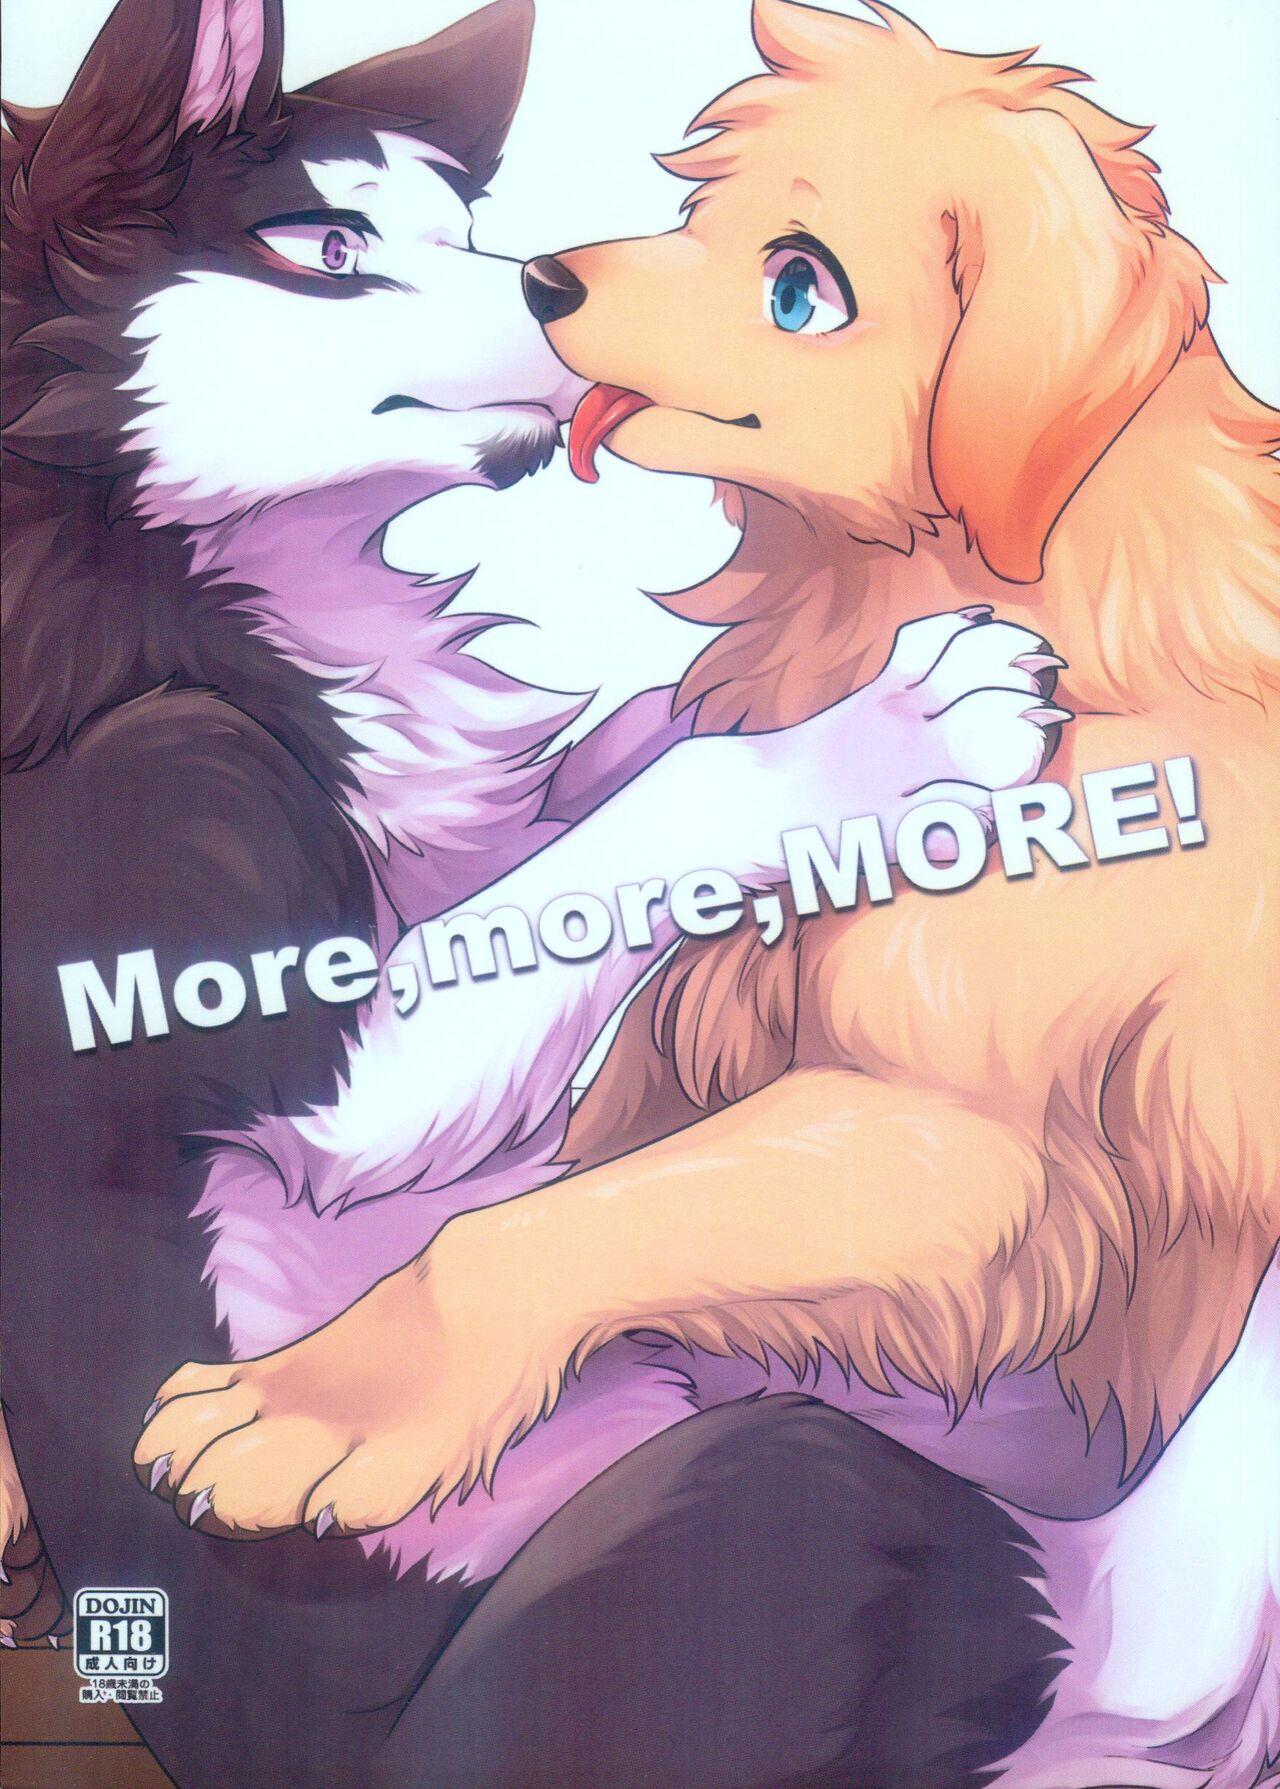 More,more,MORE! [回転ParaDOGs (水賀つくね)] [中国語] [無修正] [DL版] 0